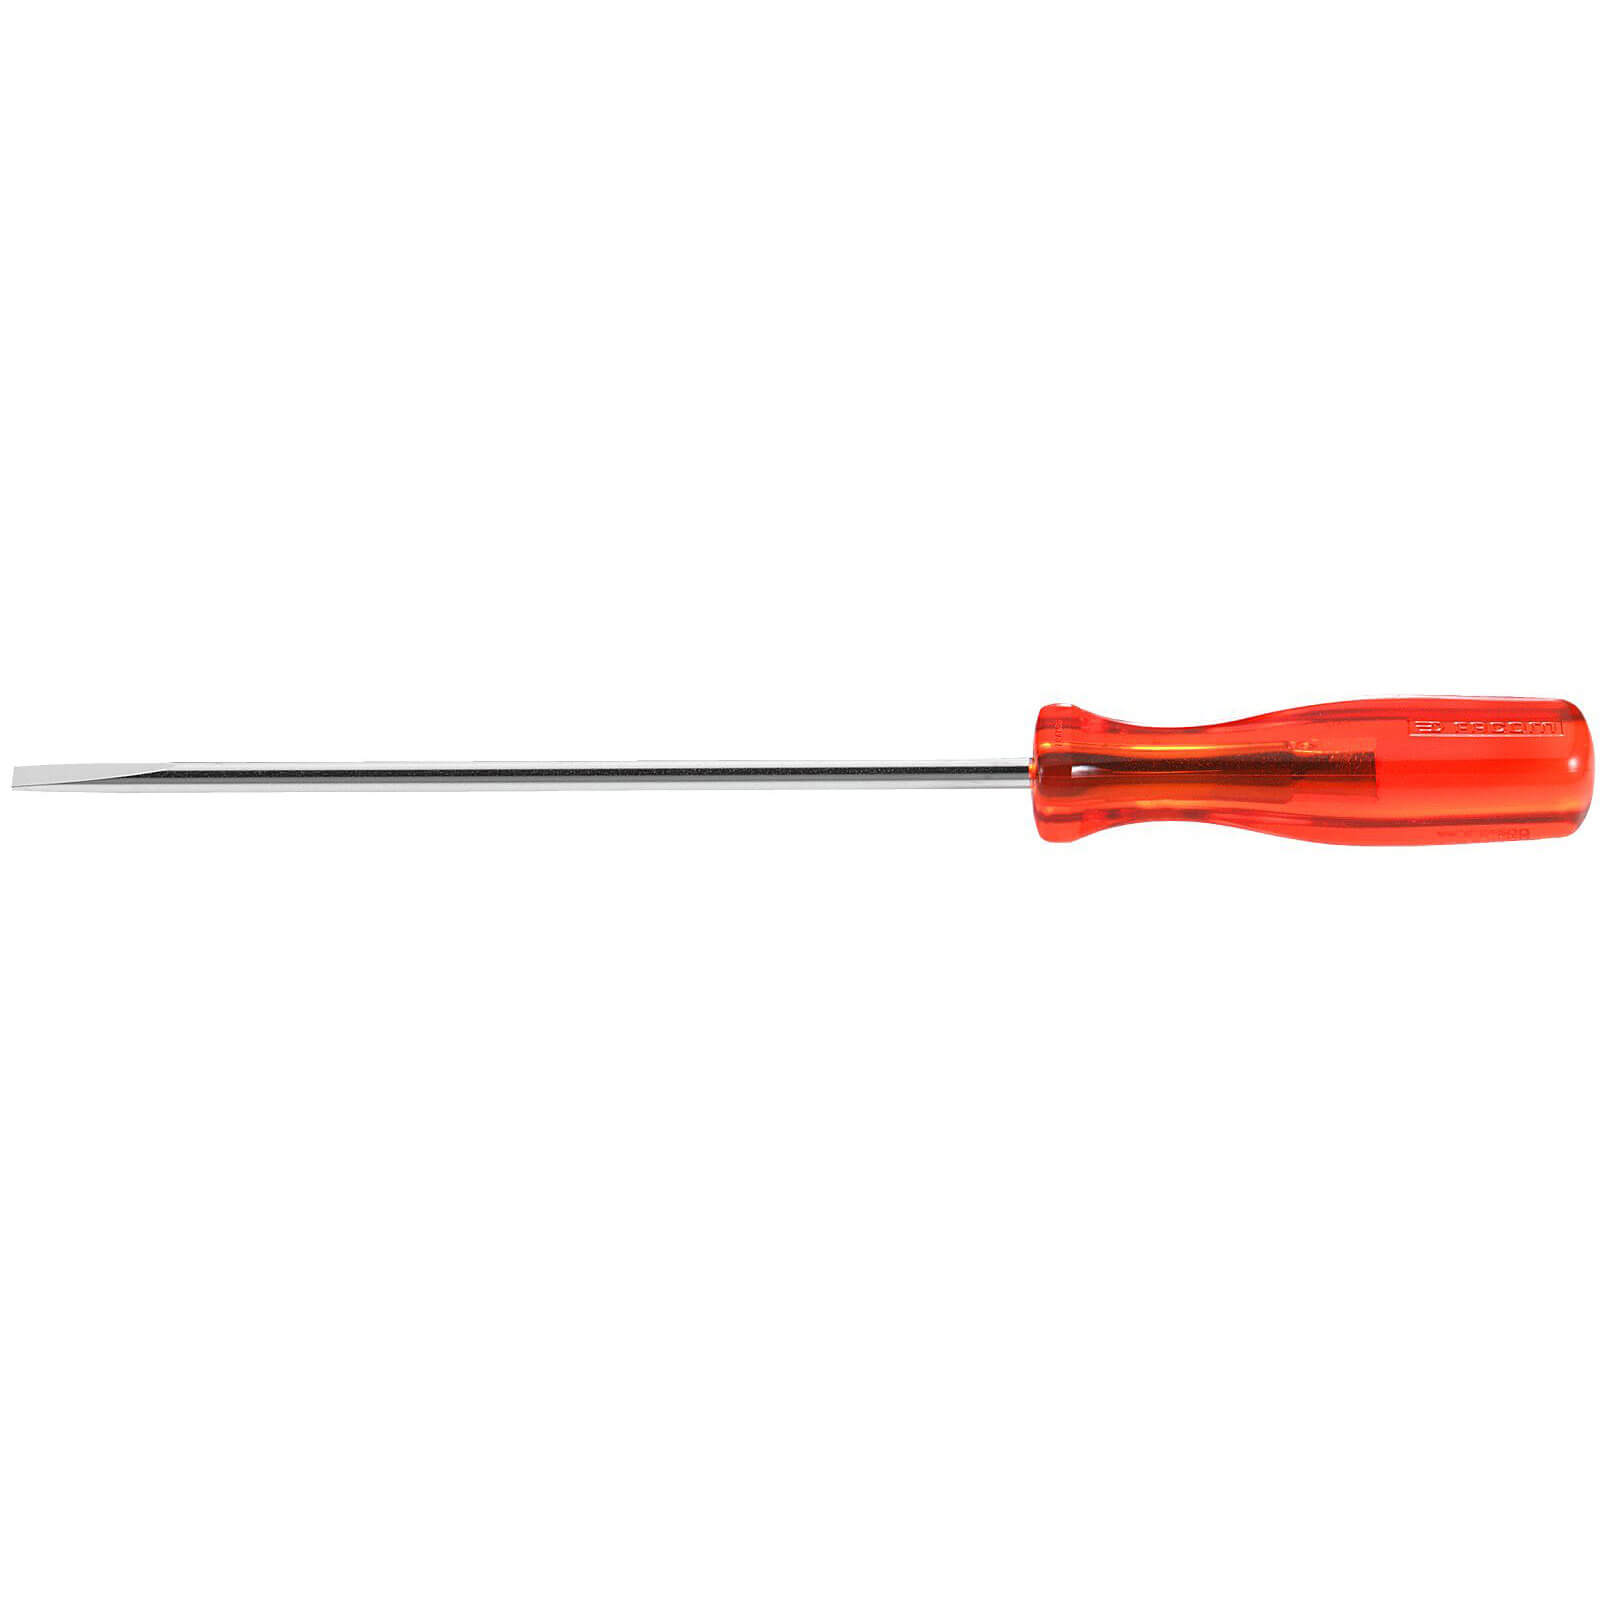 Image of Facom Isoryl Parallel Slotted Screwdriver 5.5mm 150mm